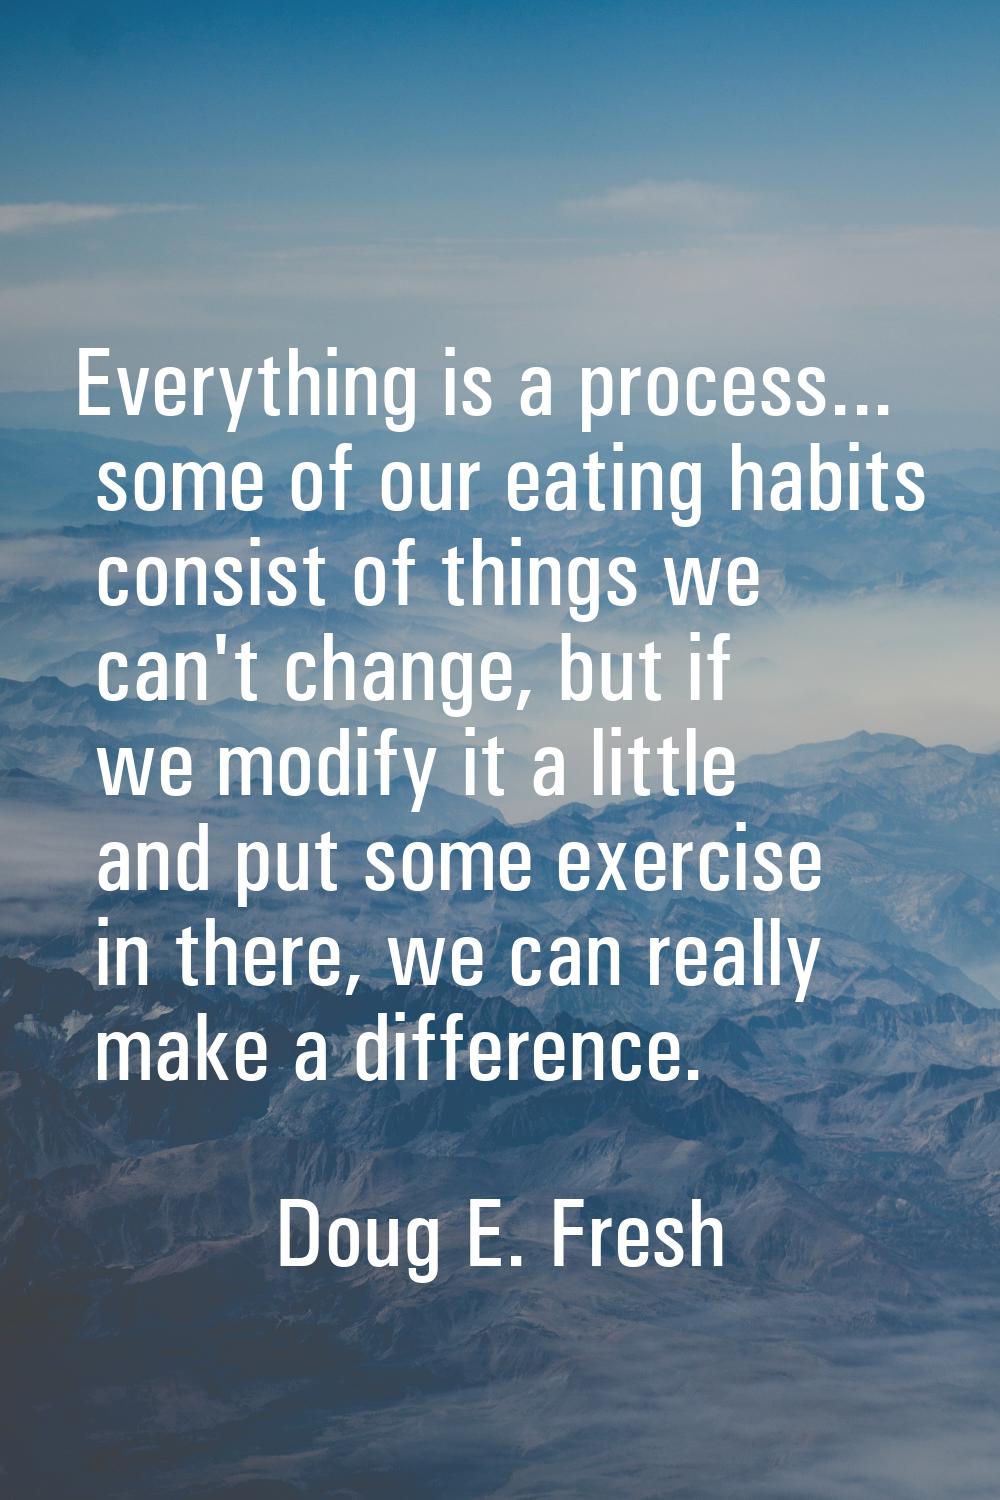 Everything is a process... some of our eating habits consist of things we can't change, but if we m